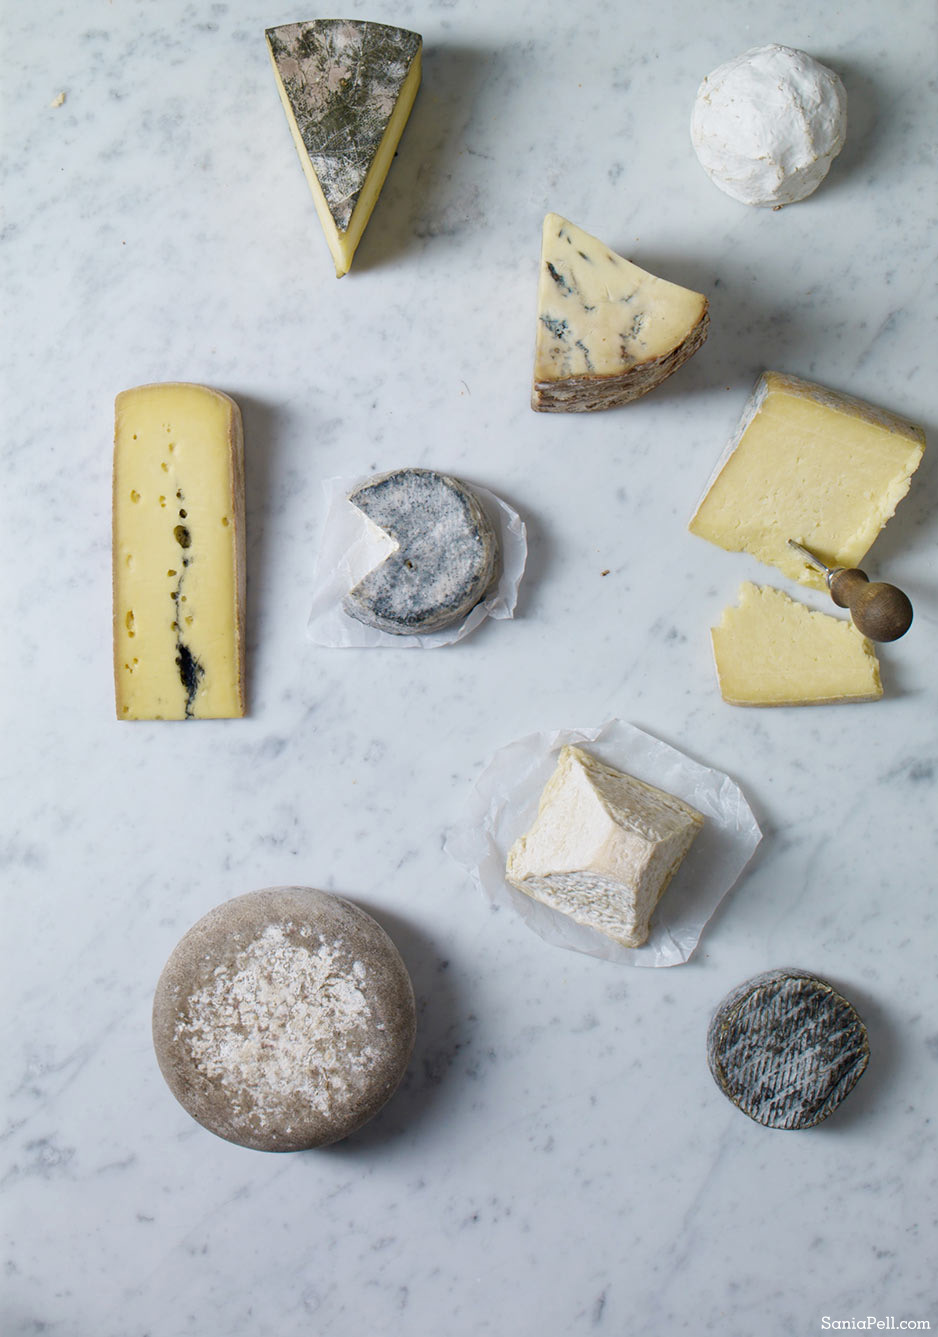 cheeses-that-pleases-light-13